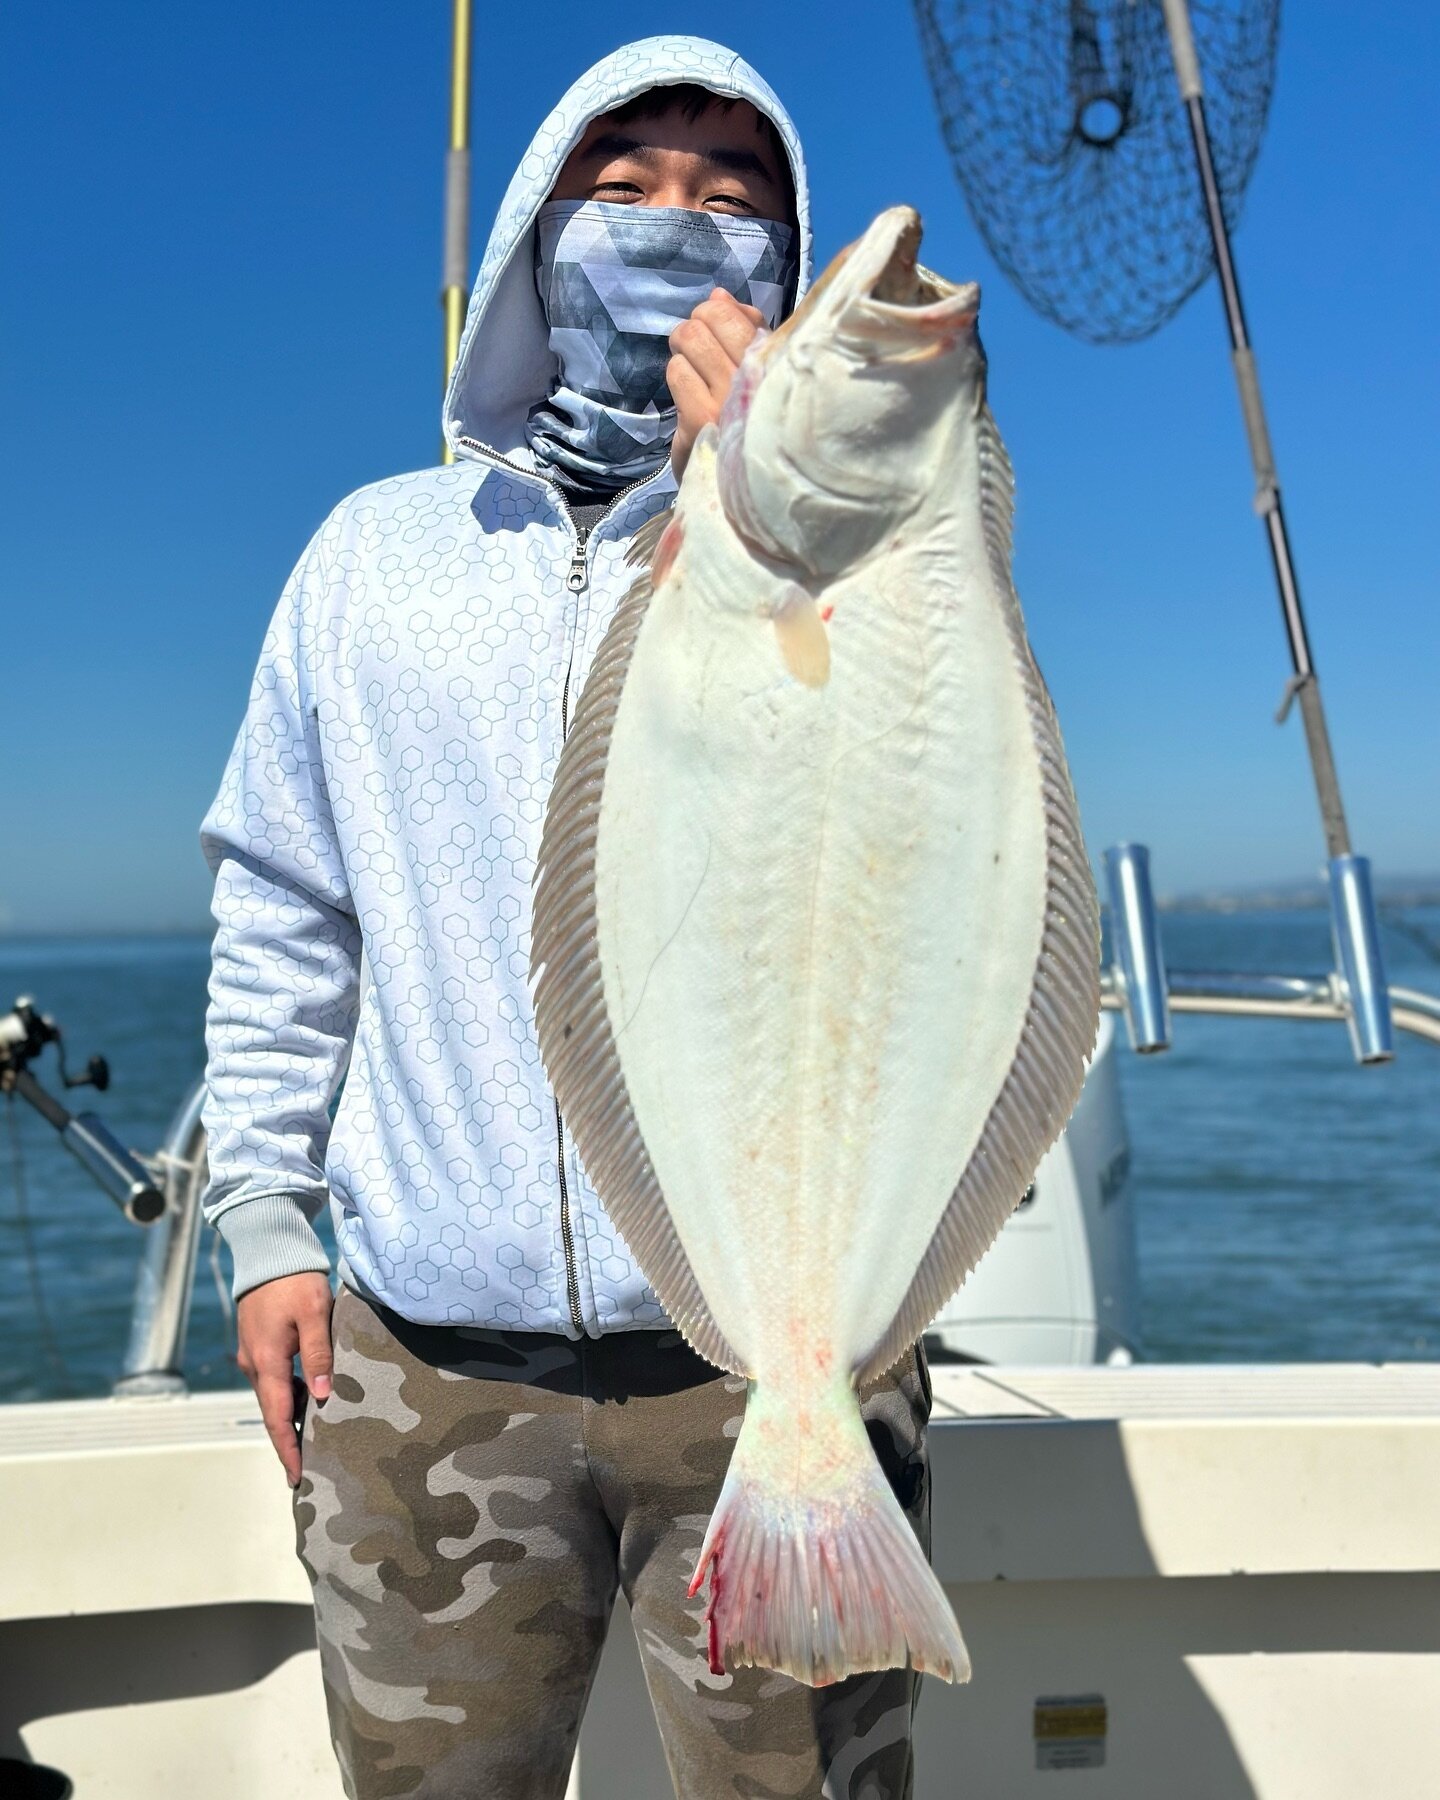 With all this nice weather we are having it time to get out on the water go fishing and soak up the sunshine! #scallywag fish #halibut #sanfranciscobay